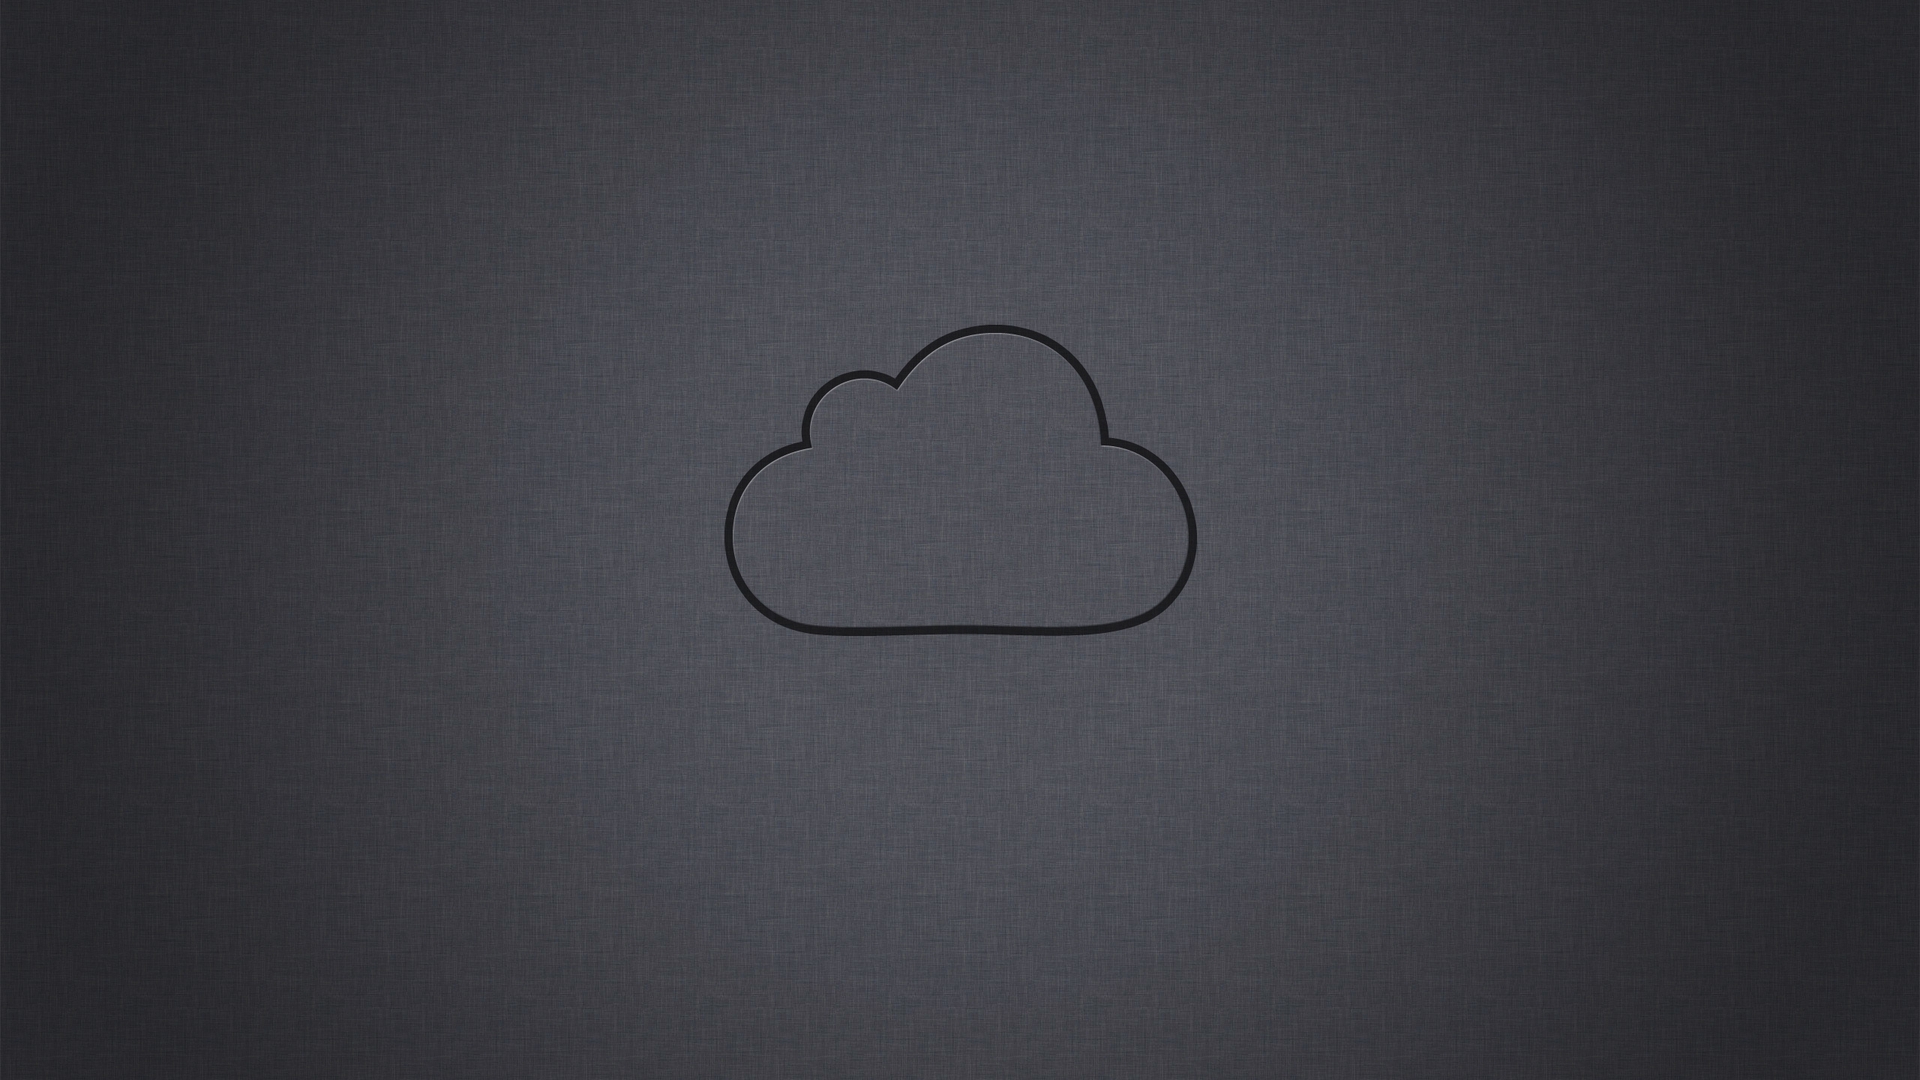 Image: Cloud, outline, gray background